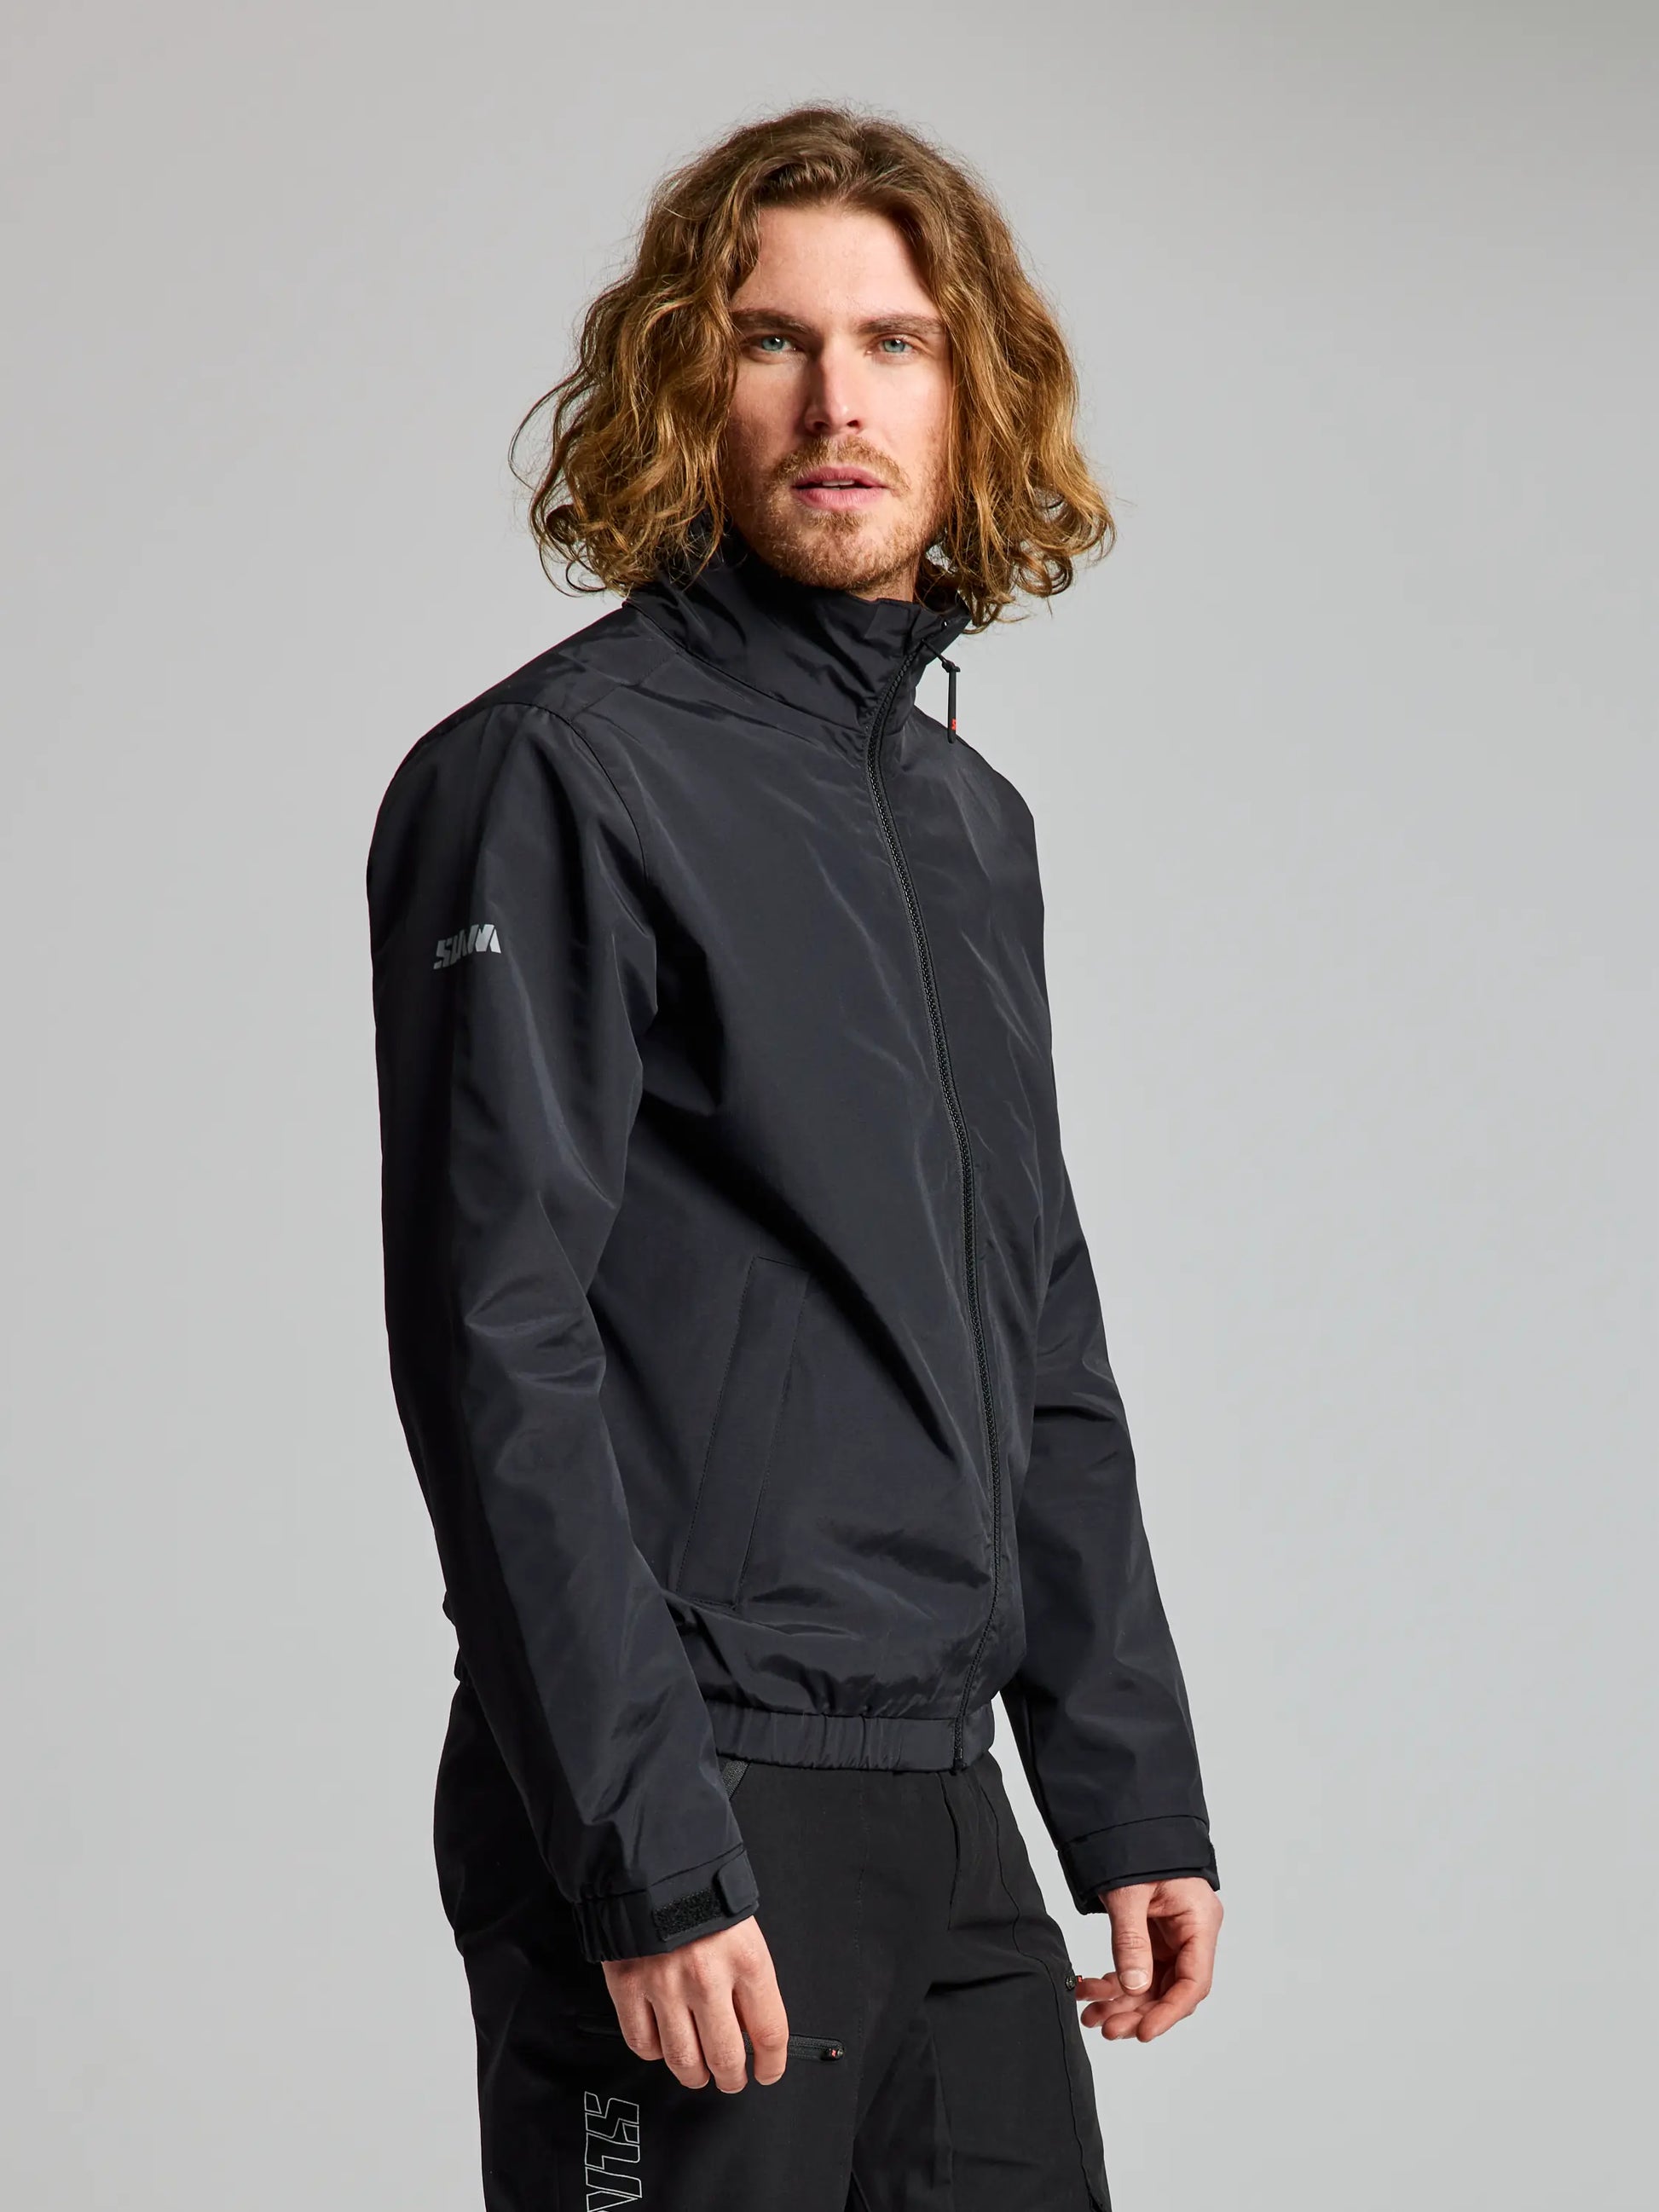 Sailing Jacket WORKS advanced / anthracite buy now